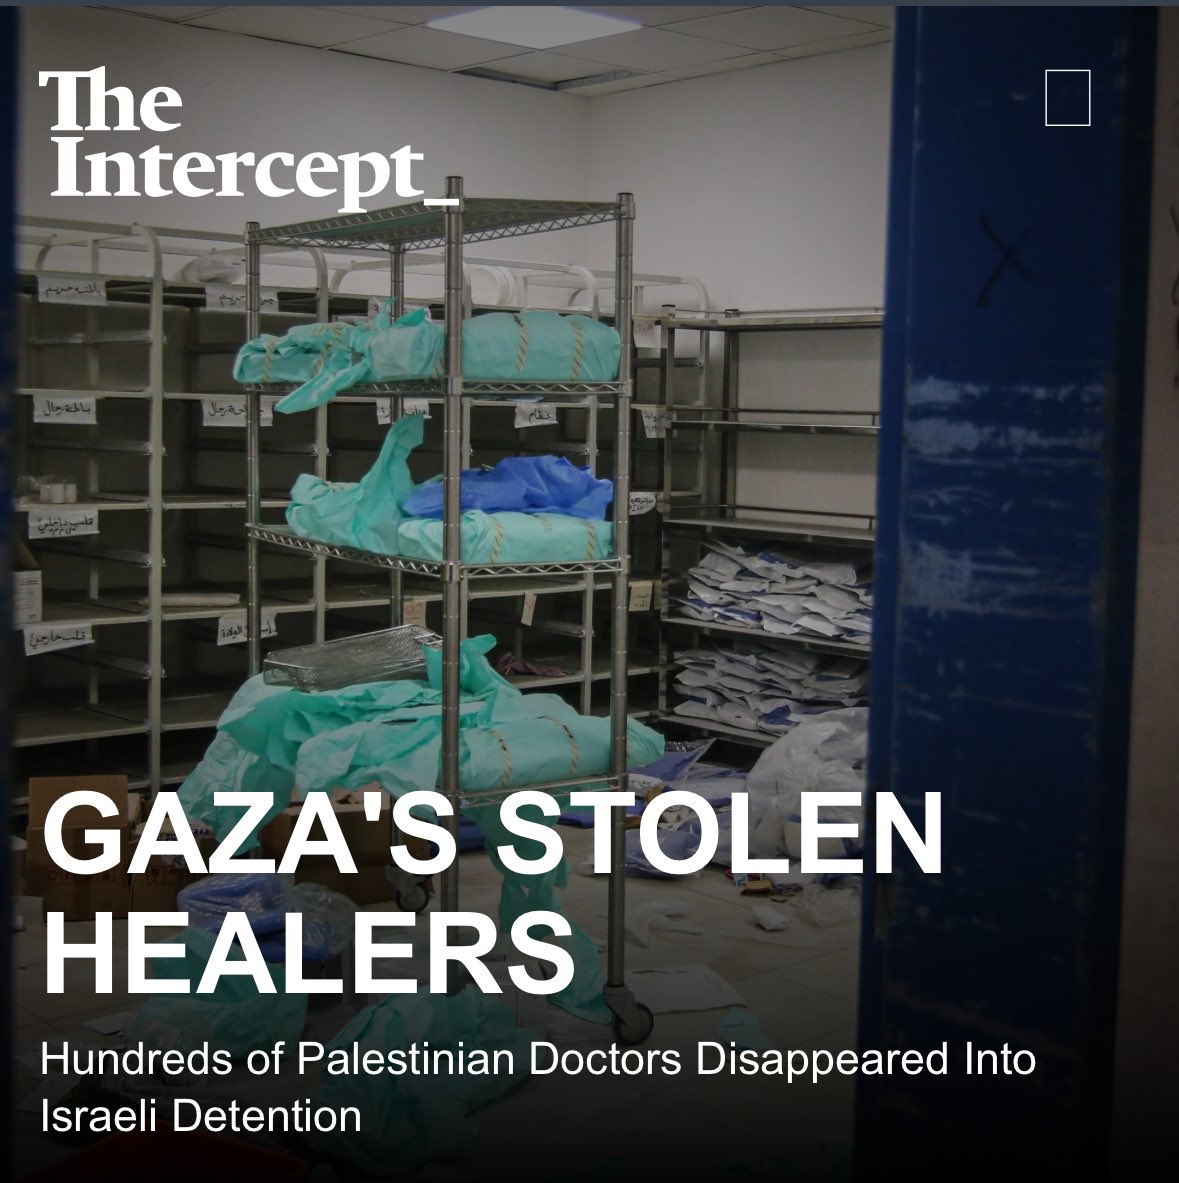 “Unfortunately, when they knew that I am a doctor and general surgeon, they treated me more badly” Utterly devastating article in @theintercept documenting Israel’s systematic targeting & abuse of Palestinian medical personnel - take the time to read in full.